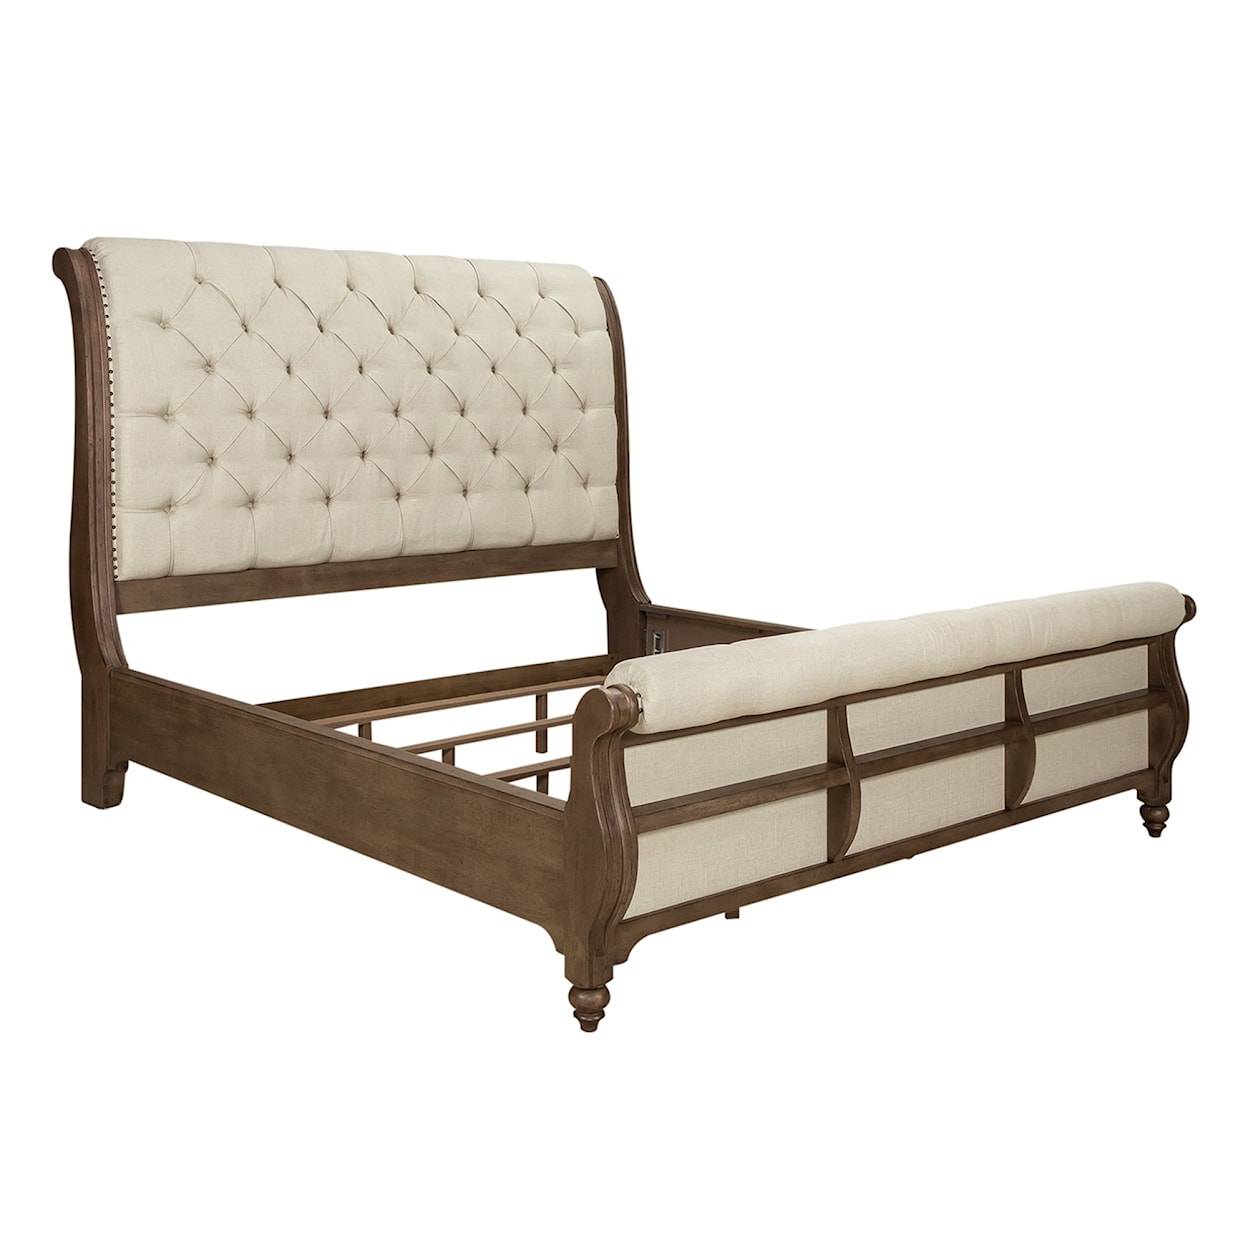 Libby Americana Farmhouse Upholstered Queen Sleigh Bed